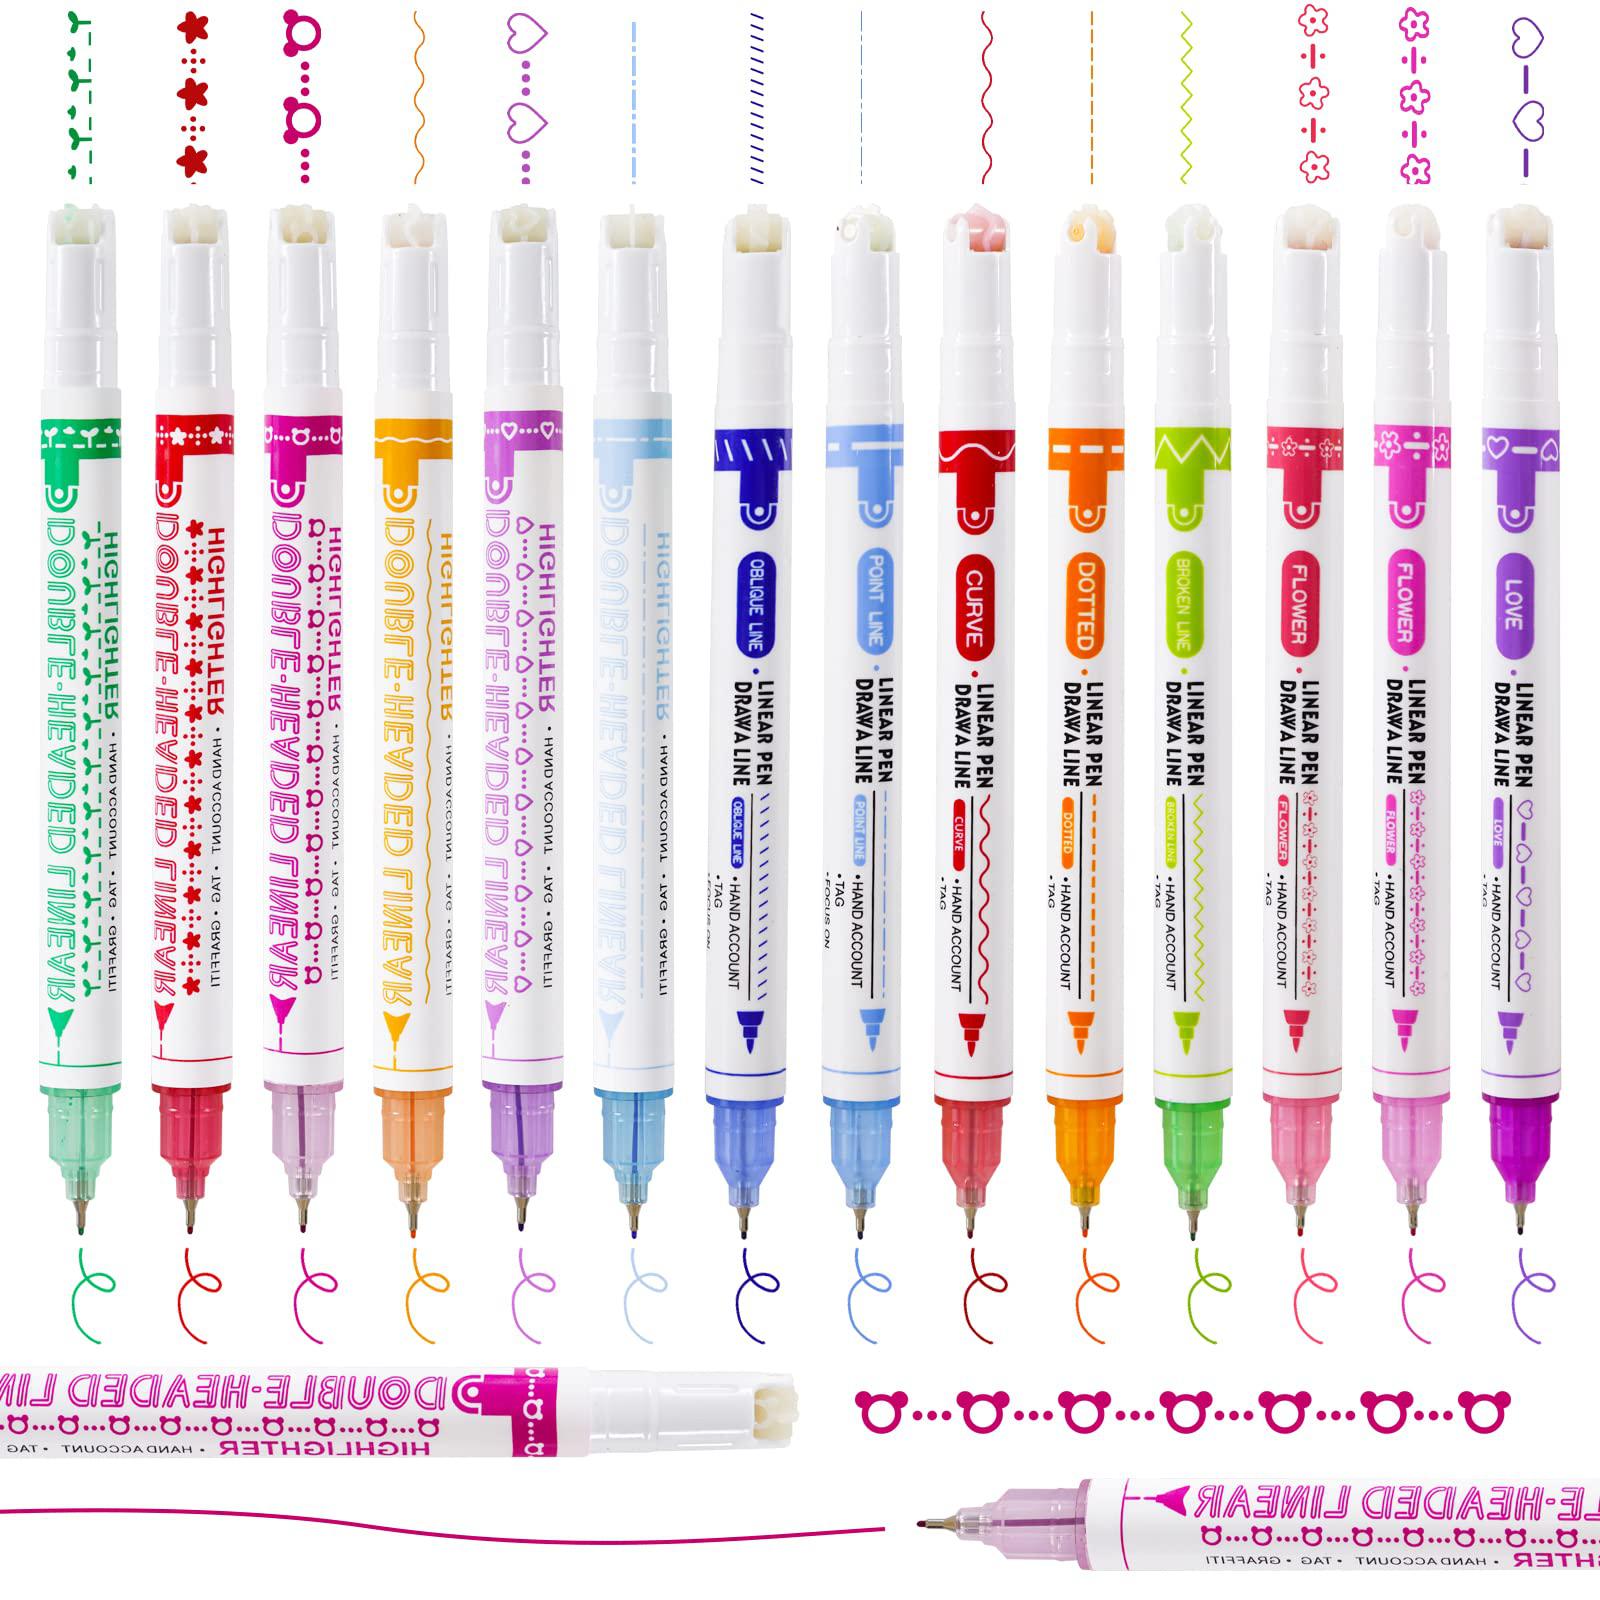 HHLCWA 14 Styles Double Tip Colored Pens, 0.4mm Fine-Tip Color Marker Writing Pens, 14 Styles of Patterns for Notebook, Journ